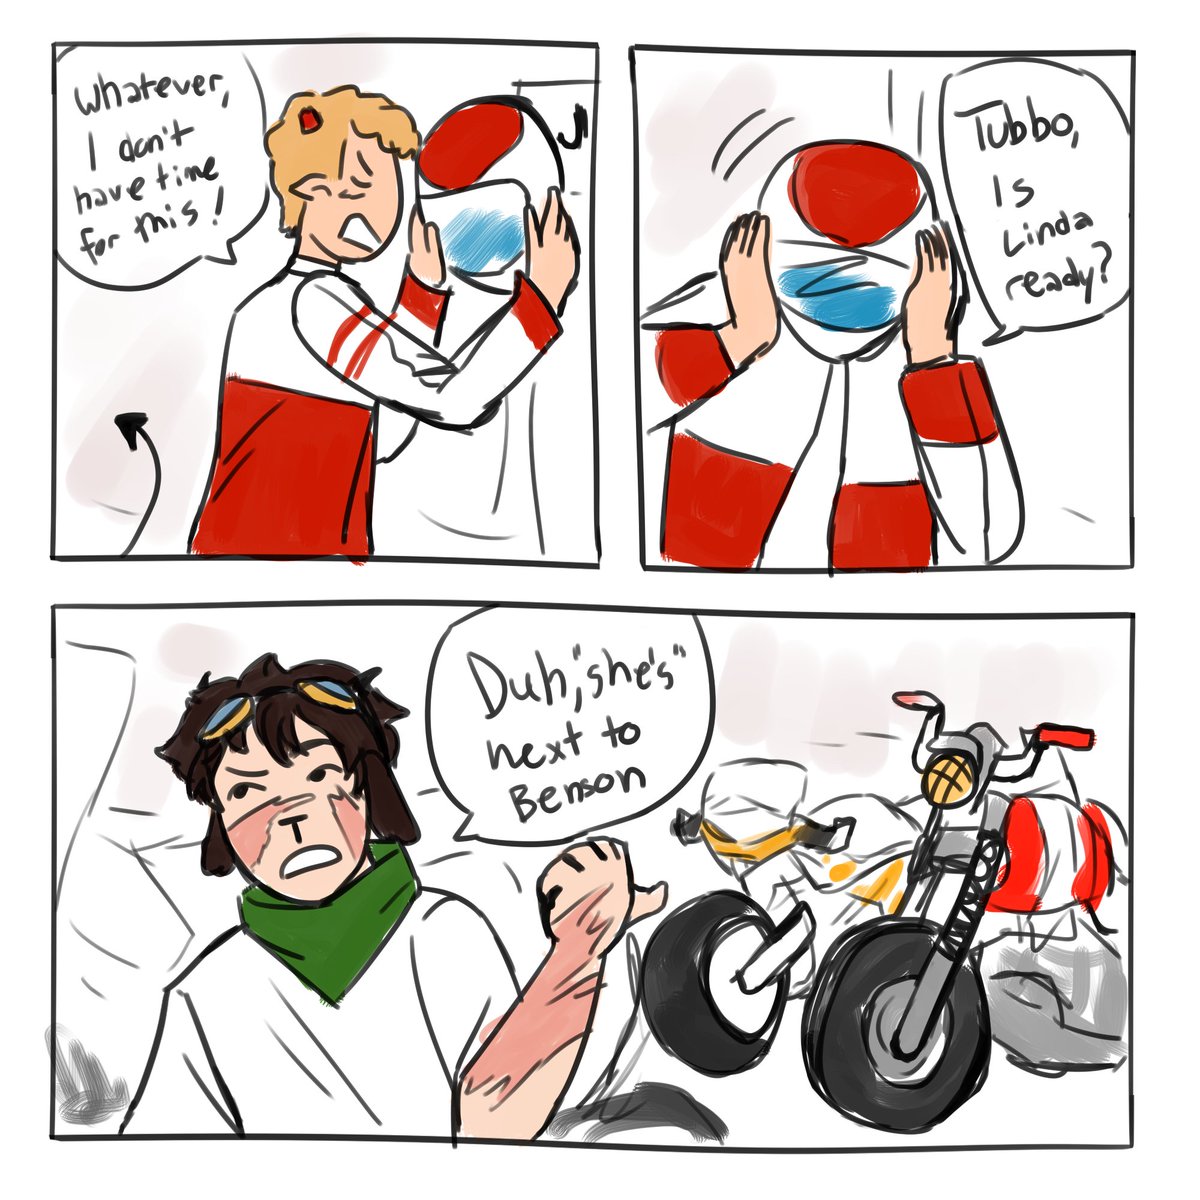 rushed this but here's a comic from an au i've had for a while. cool futuristic au where the dsmp's just about (illegal) street racing (2/3)
{ #tommyinnitfanart , #tubbofanart , #ranboofanart } 